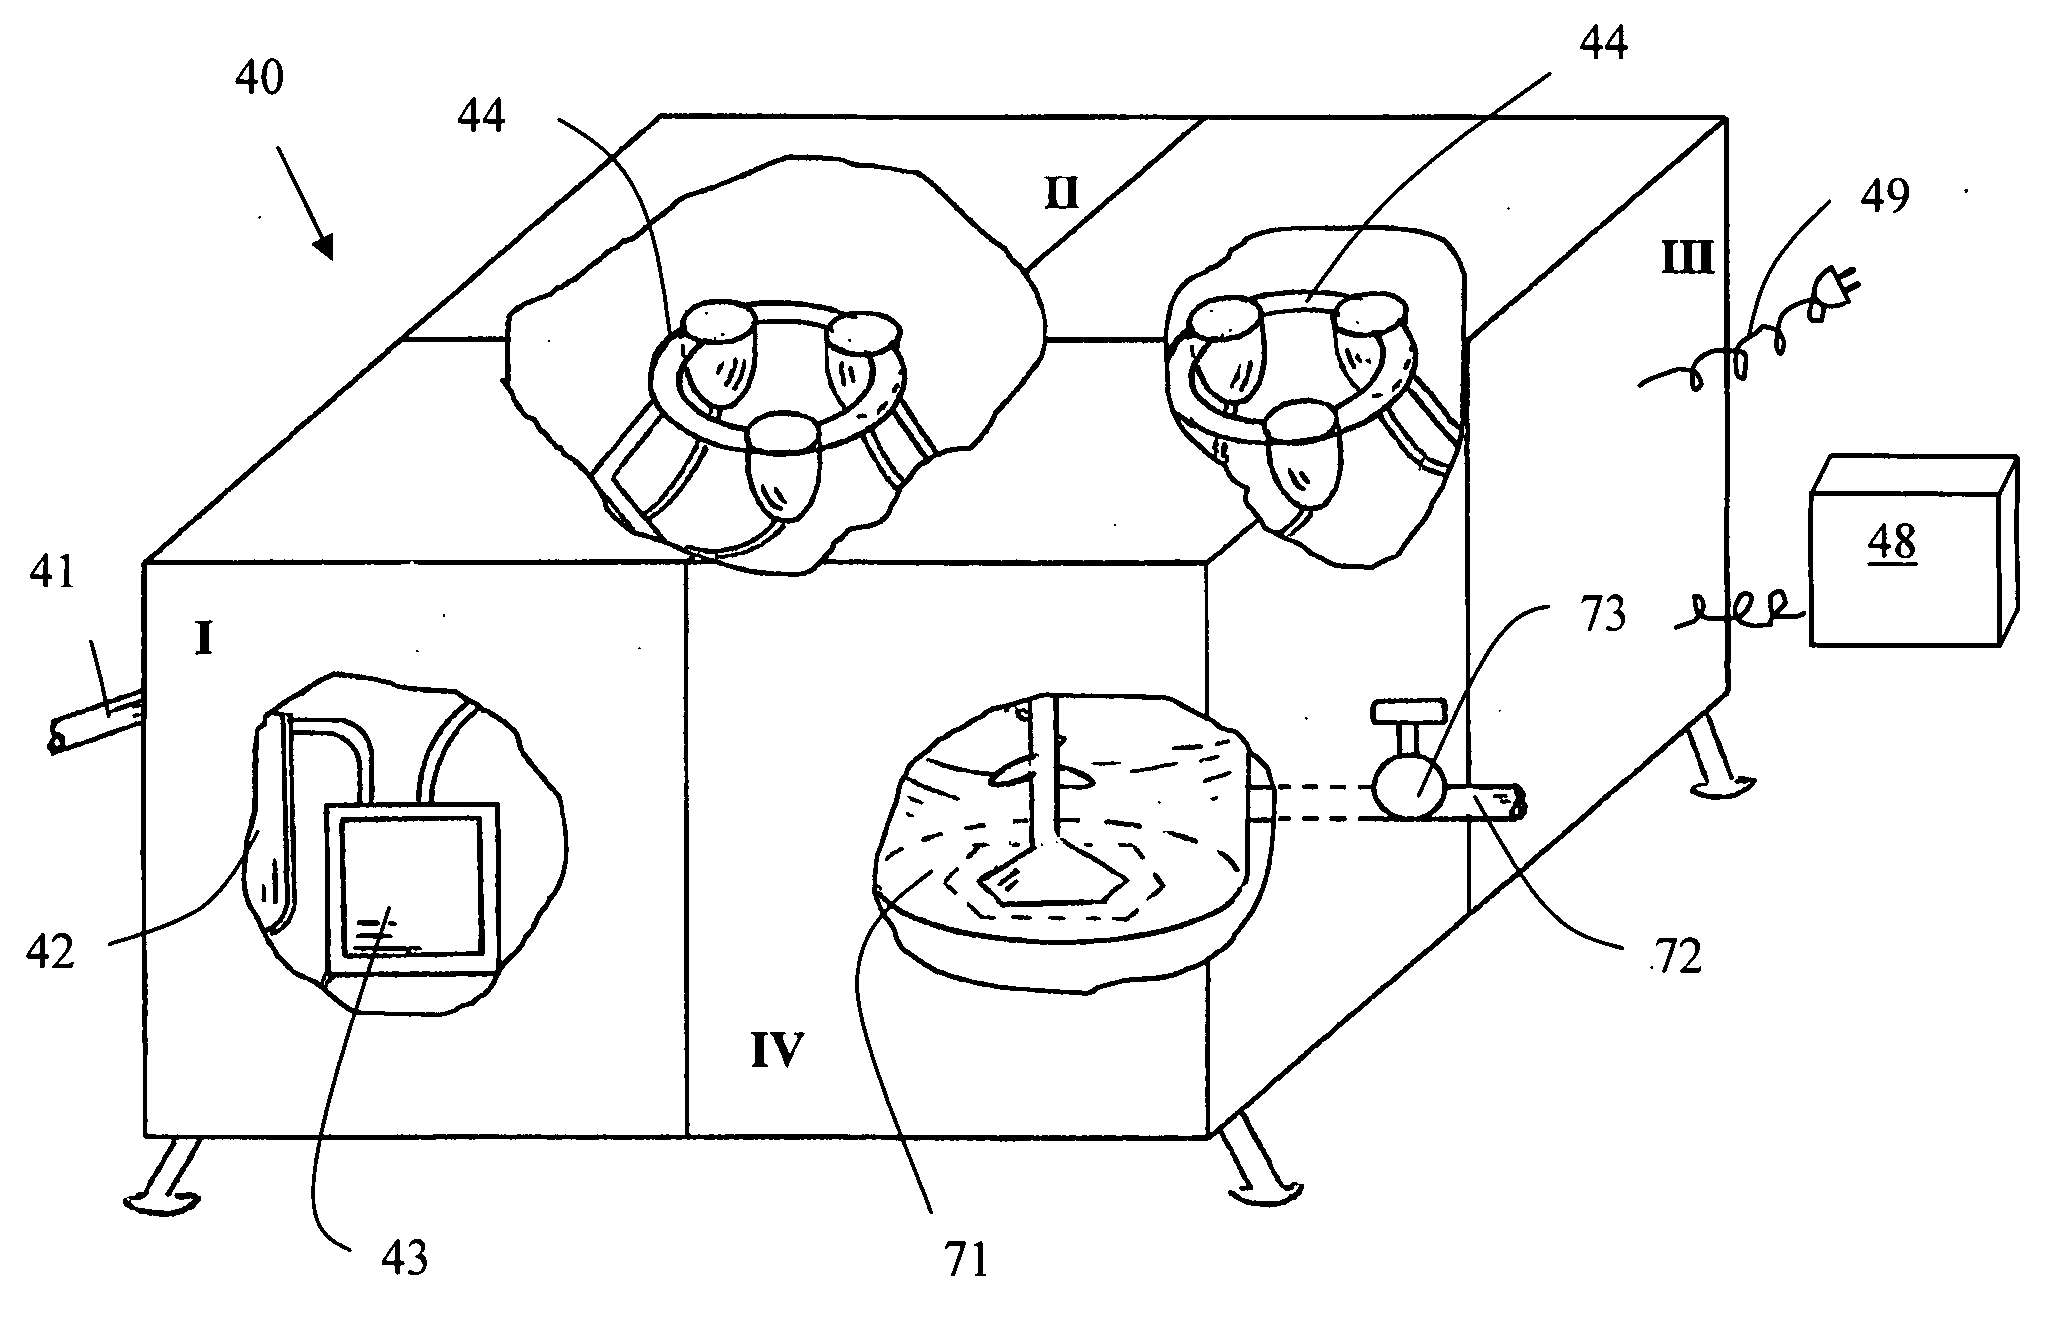 Cells isolation system for breast augmentation and reconstruction